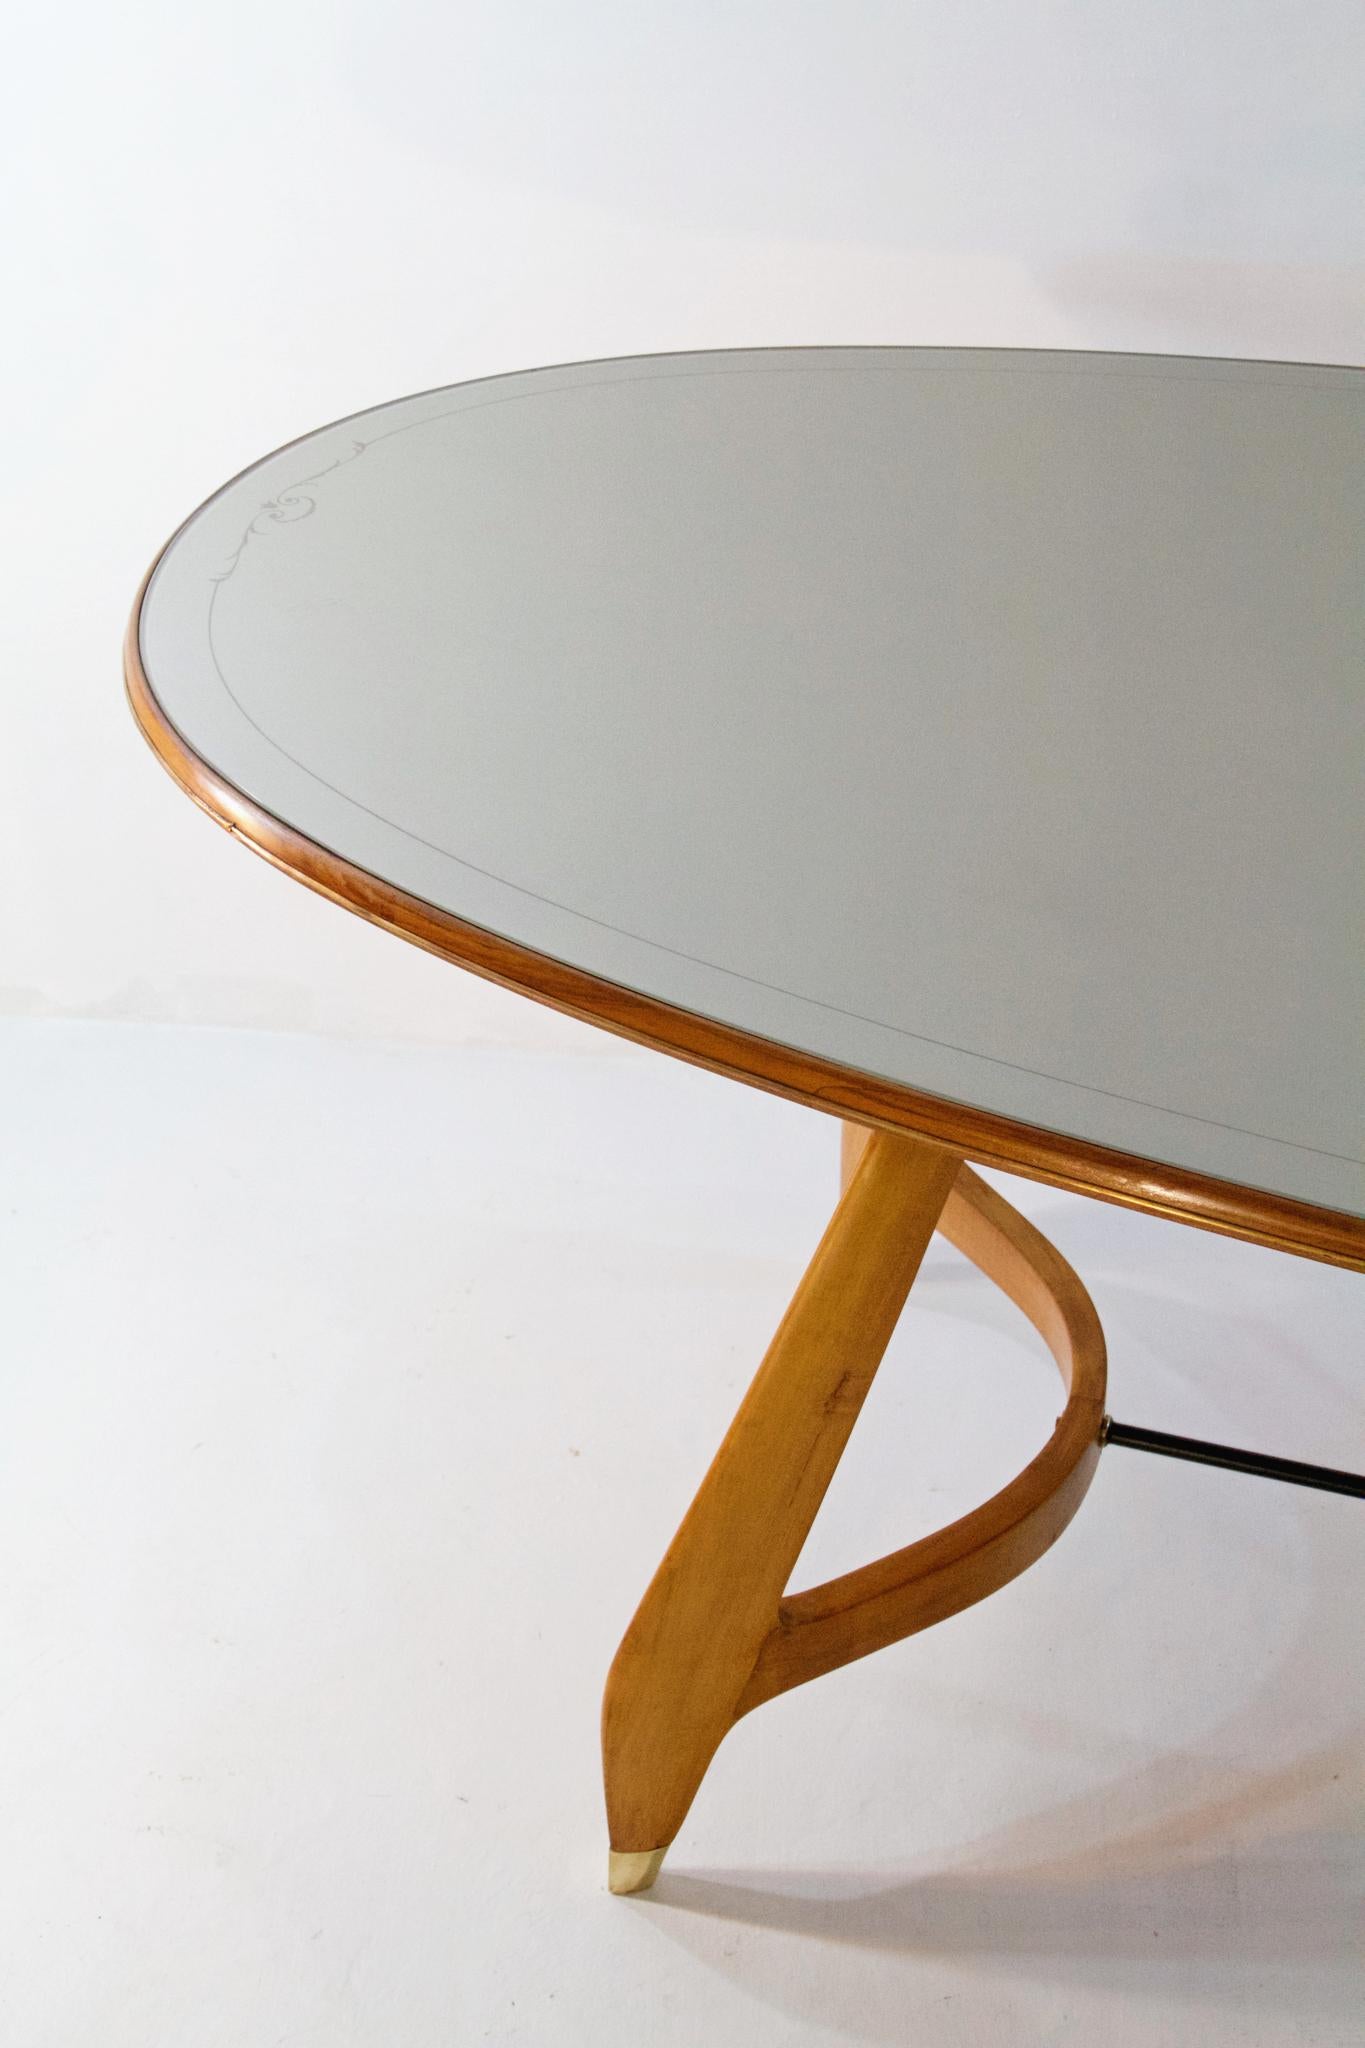 Fabulous oval dining table with an organic design and with a celadon green glass top with a decorative scroll border. Produced in Italy in the 1950s attributed to Augusto Romano. The legs have supreme craftsmanship are joined by a brass stretcher